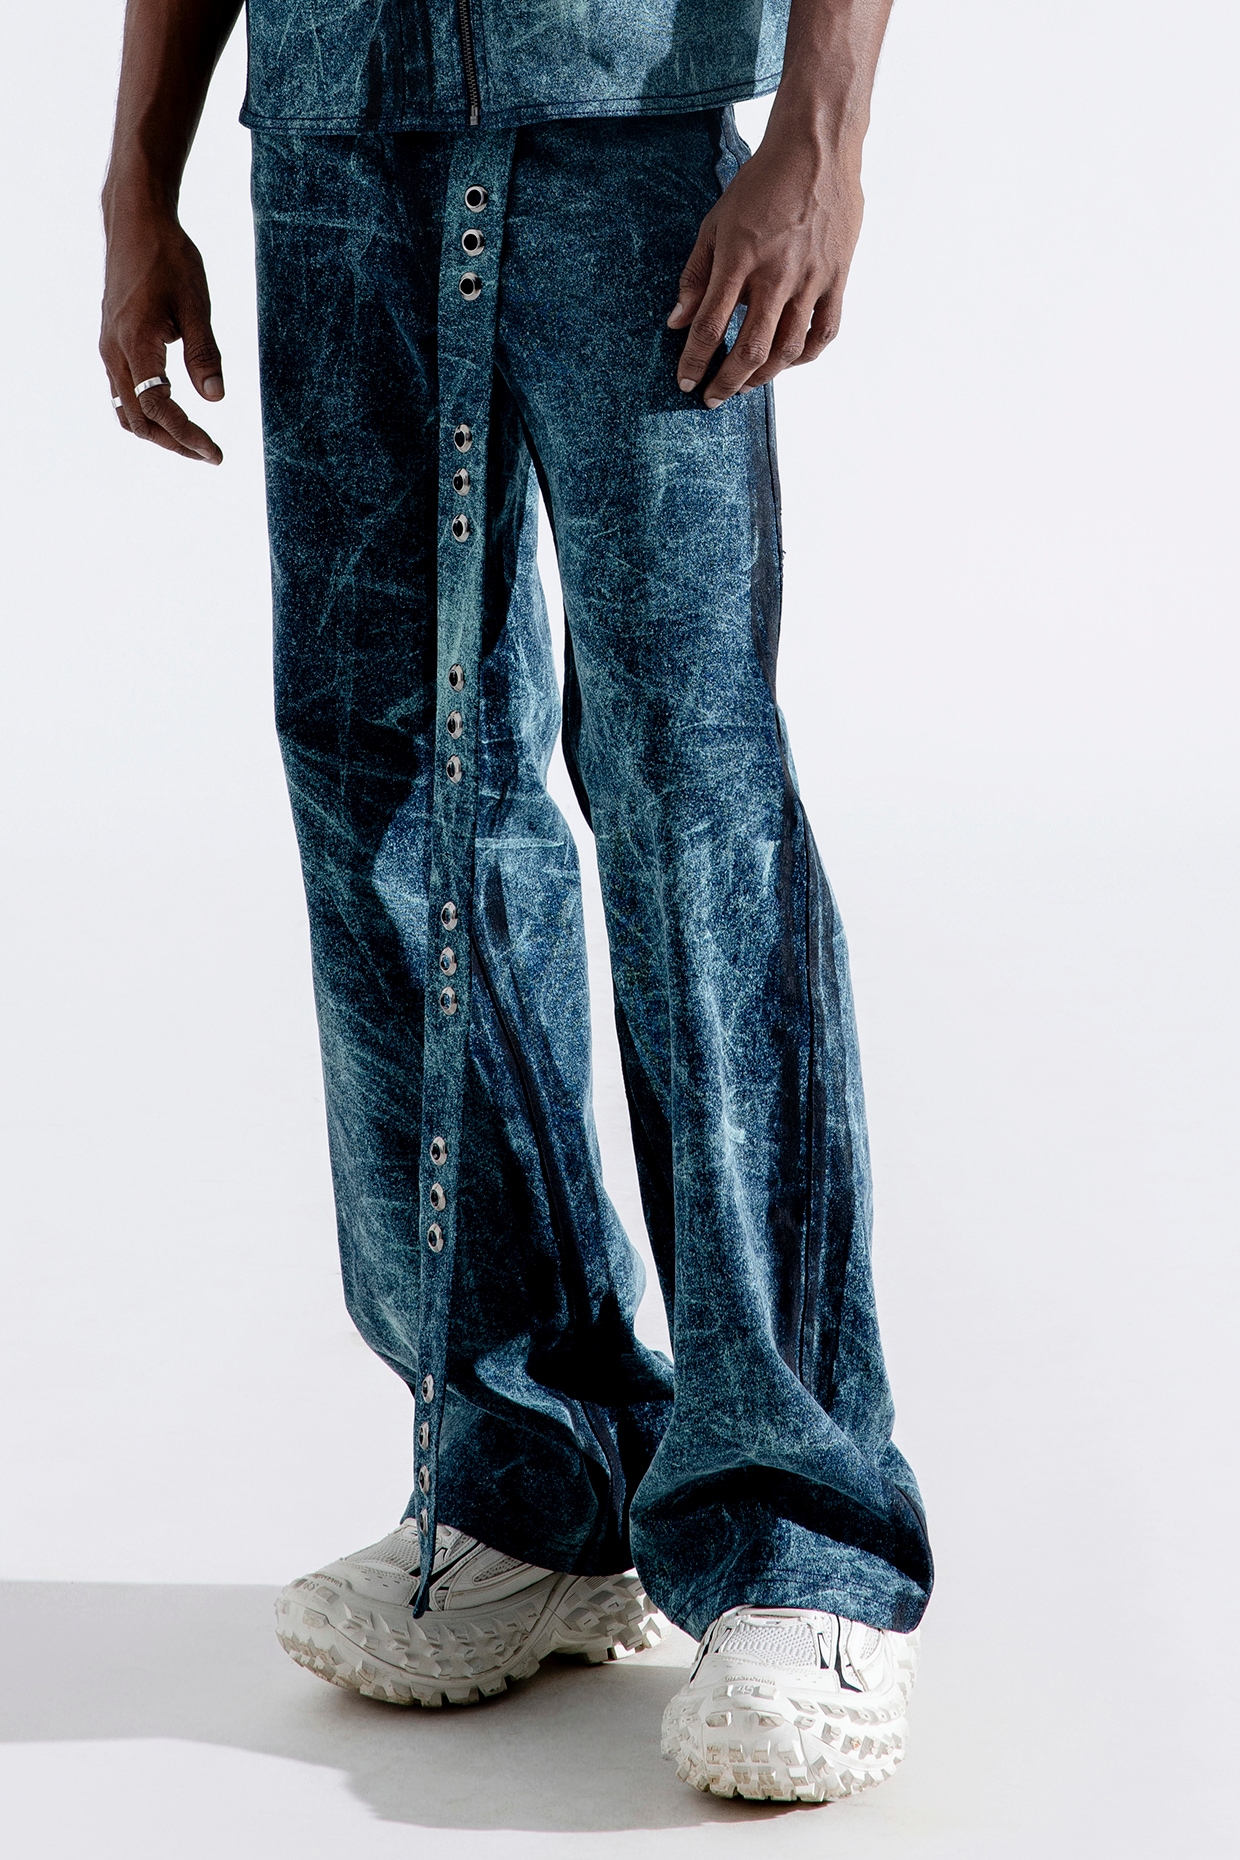 Warrior printed Jeans for Mens Denim Jeans Online Wholesale in India